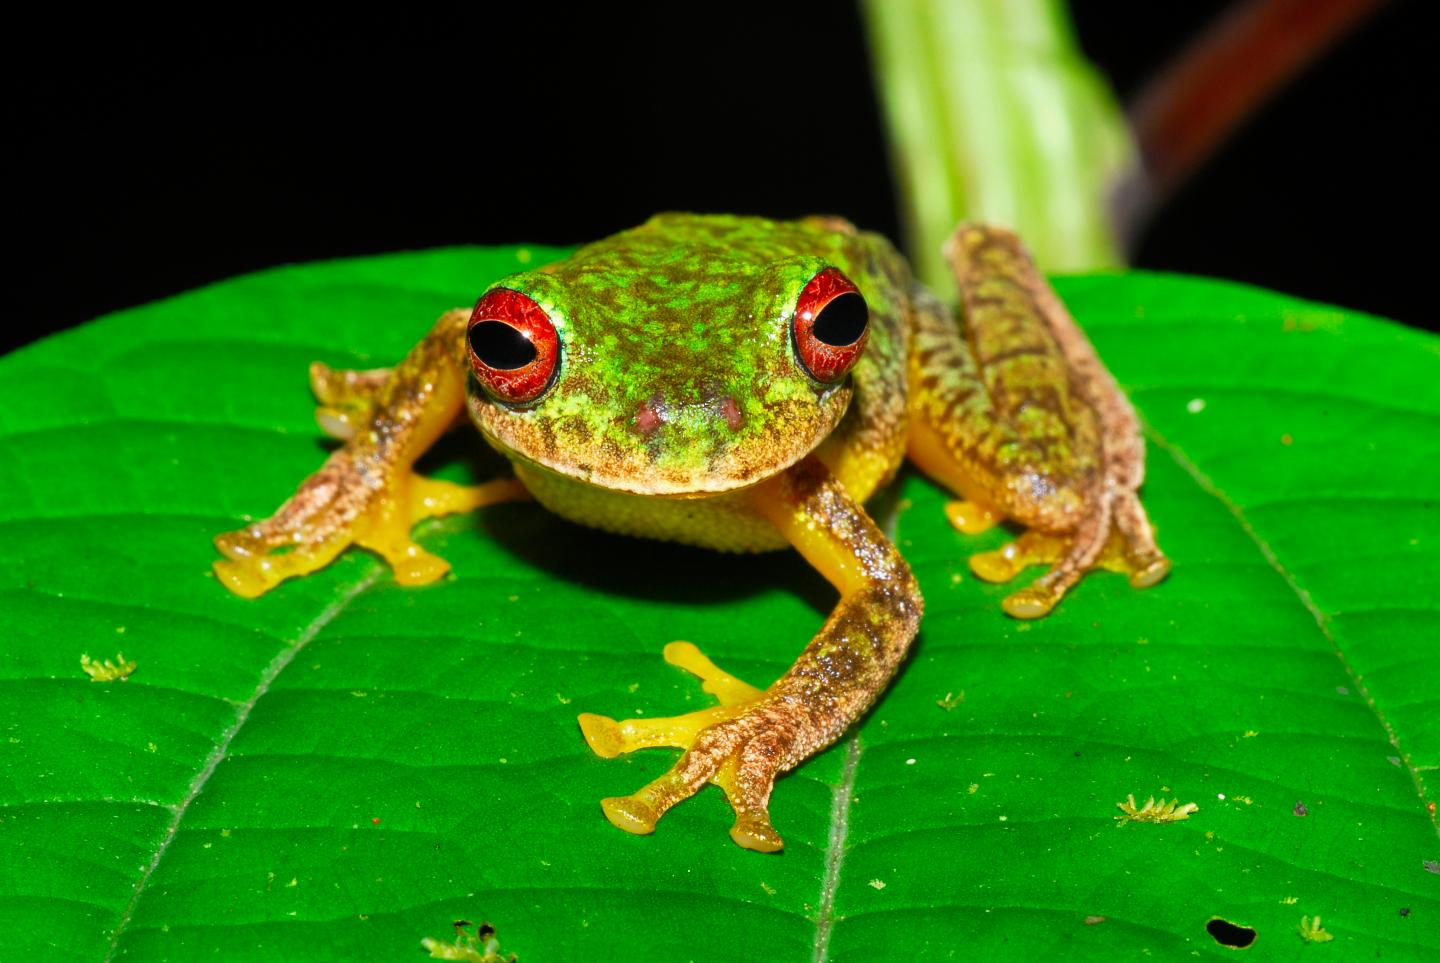 Mossy Red-eyed Frog